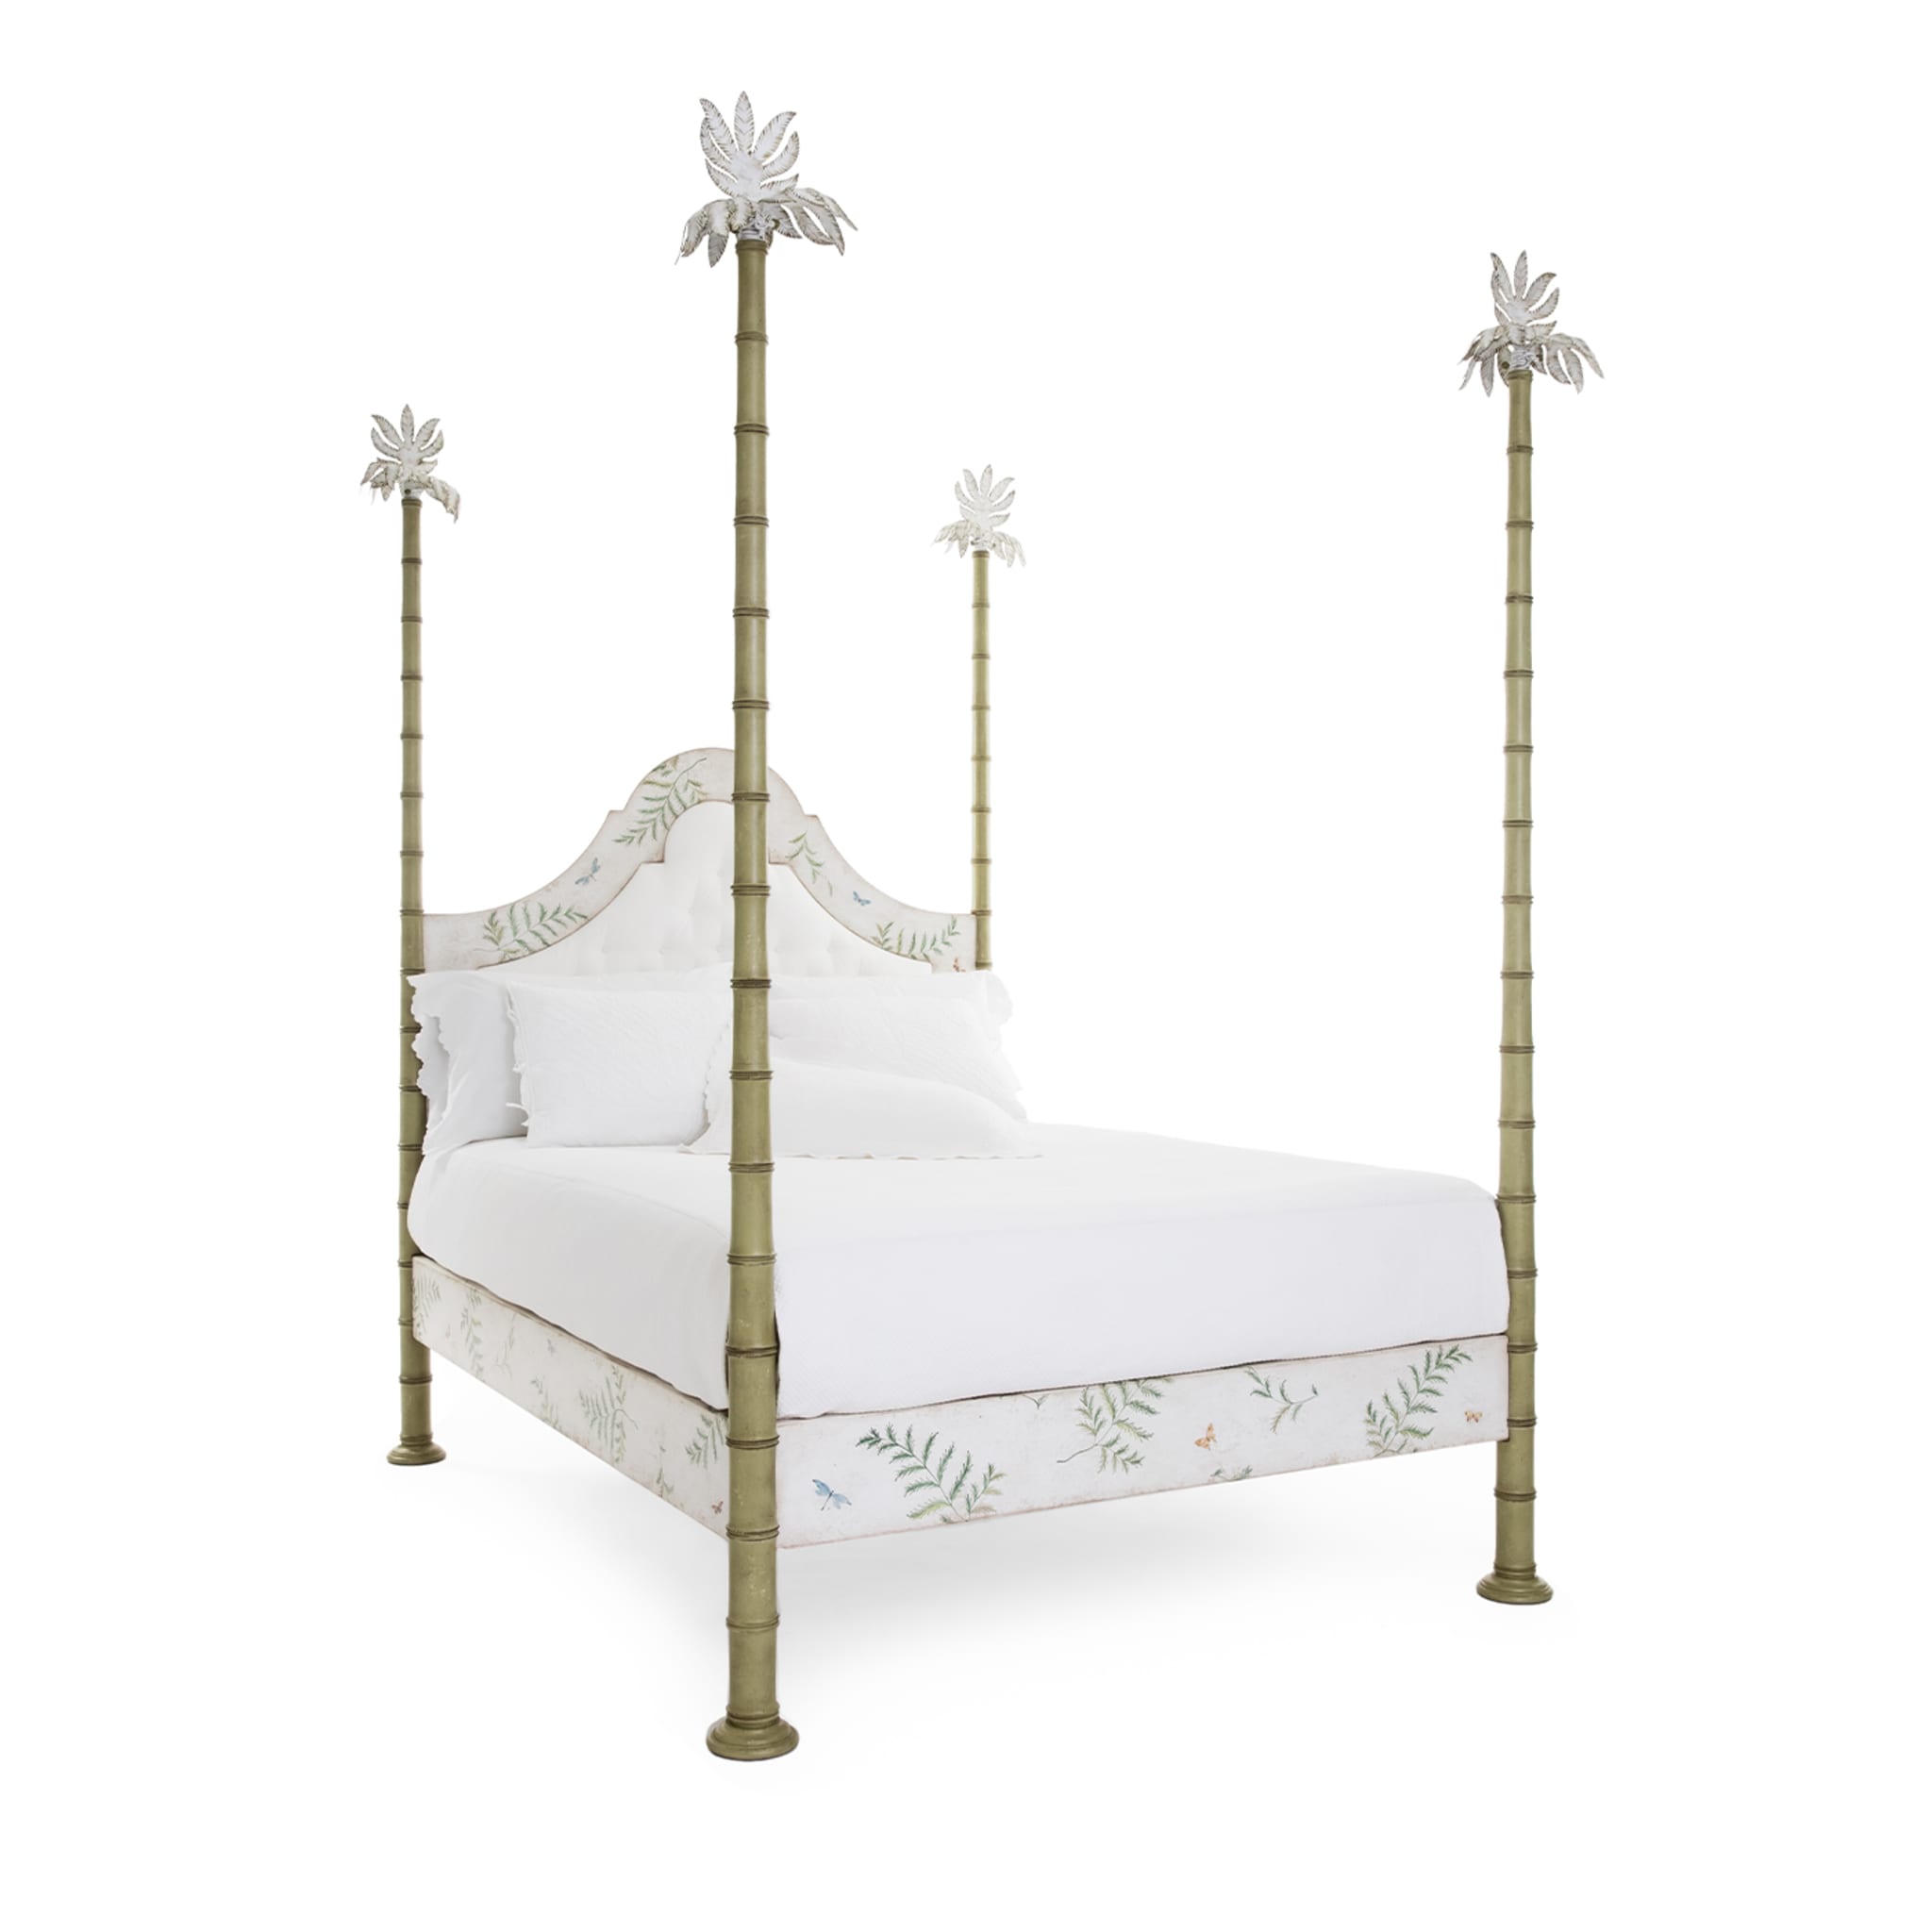 Roma Apple Green Bamboo with Ferns and Butterflies Bed - Alternative view 1